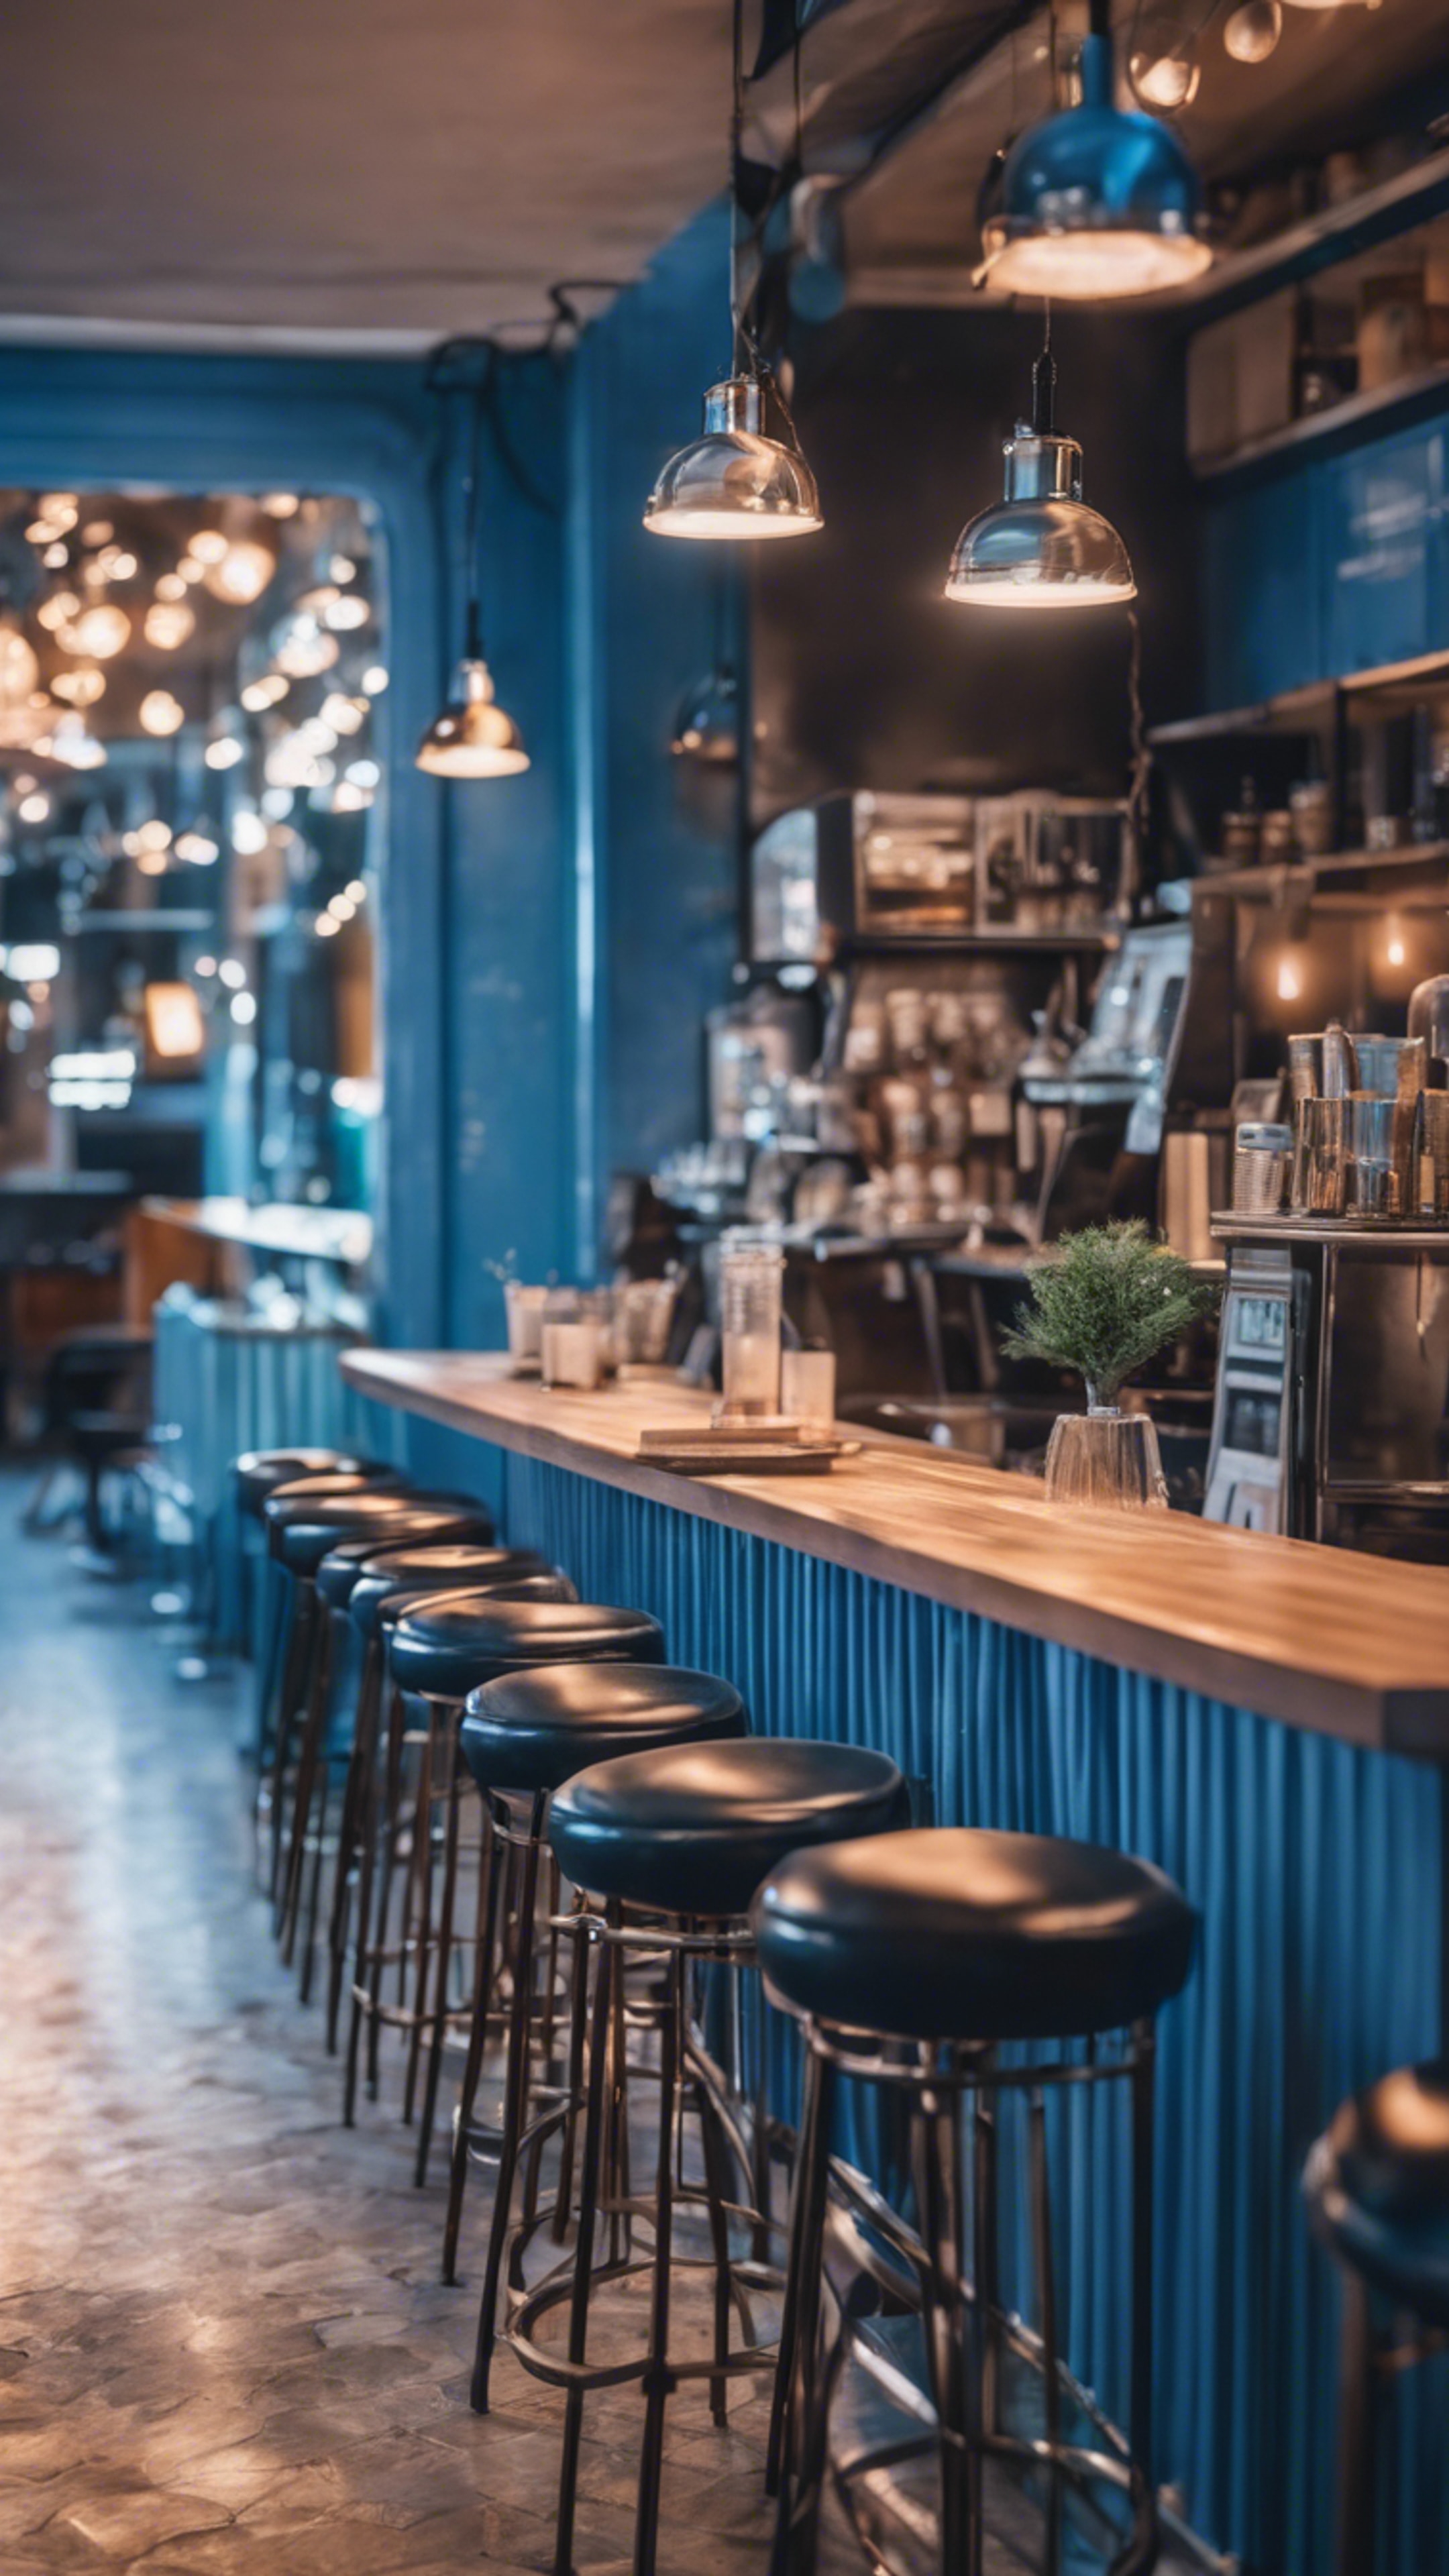 A chic urban cafe with cool blue interiors in the evening טפט[a944bfd98f8948b498de]